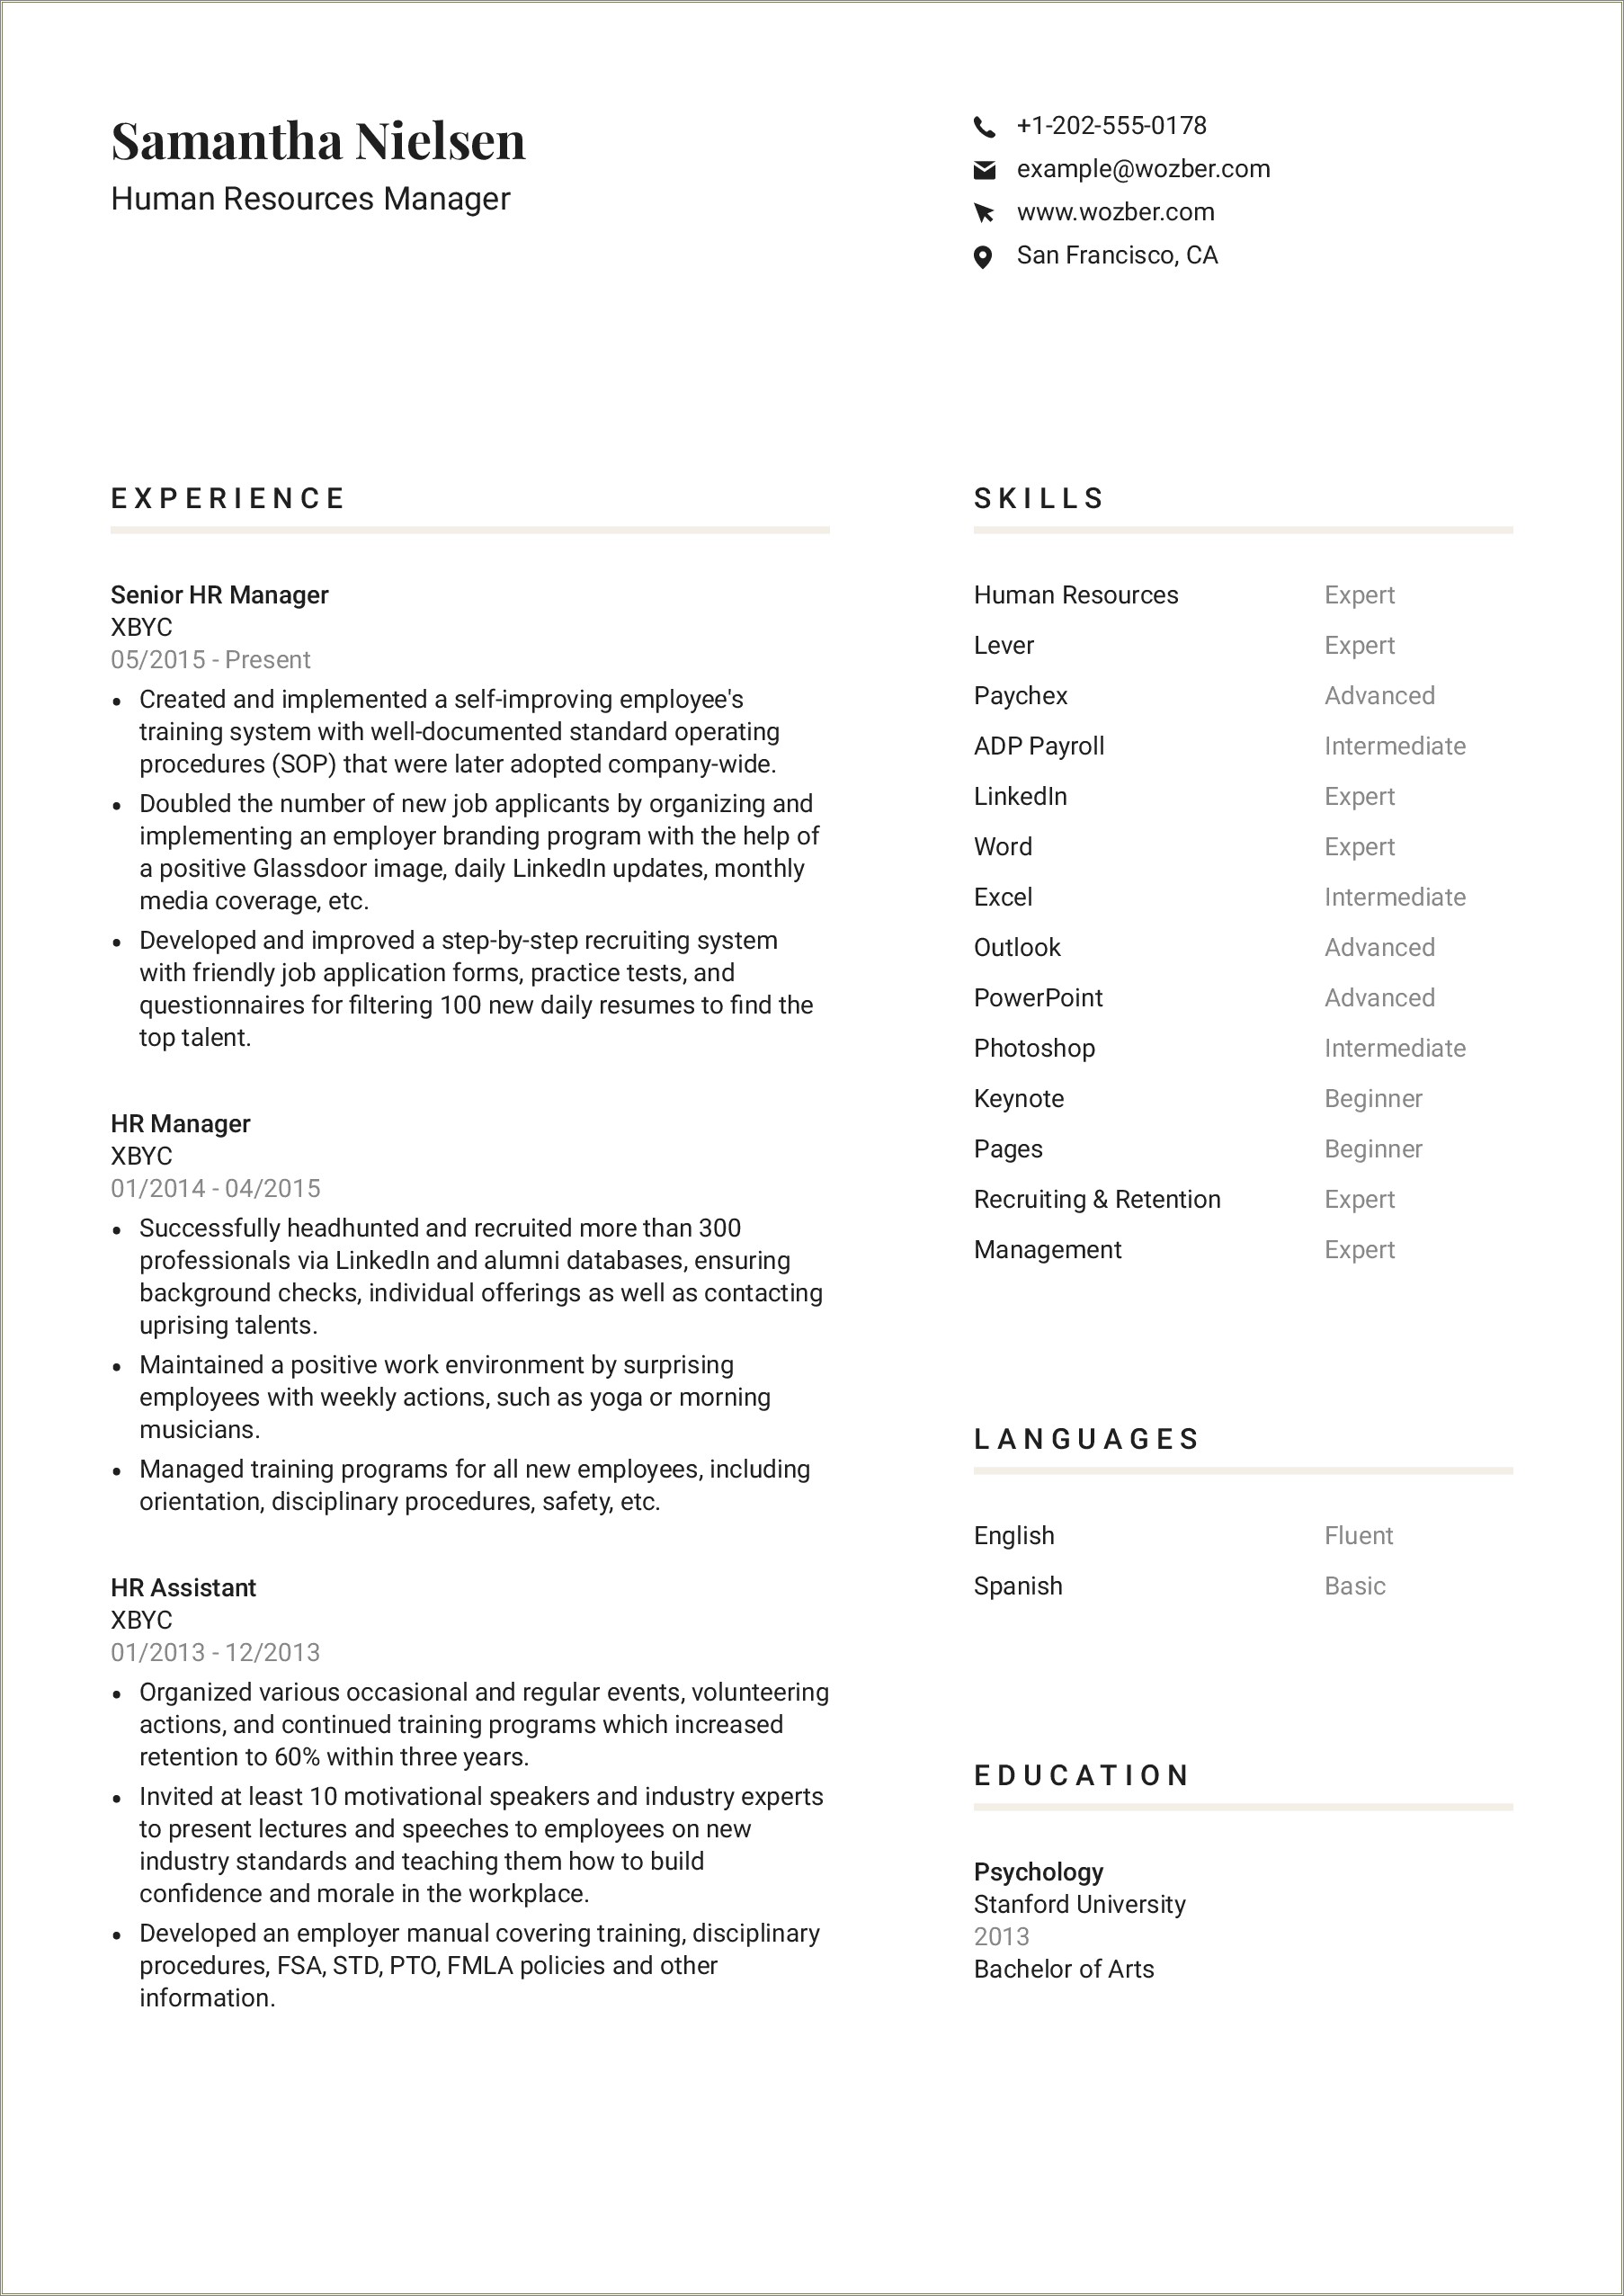 Cleint Services Asssociate Private Wealth Managment Resume